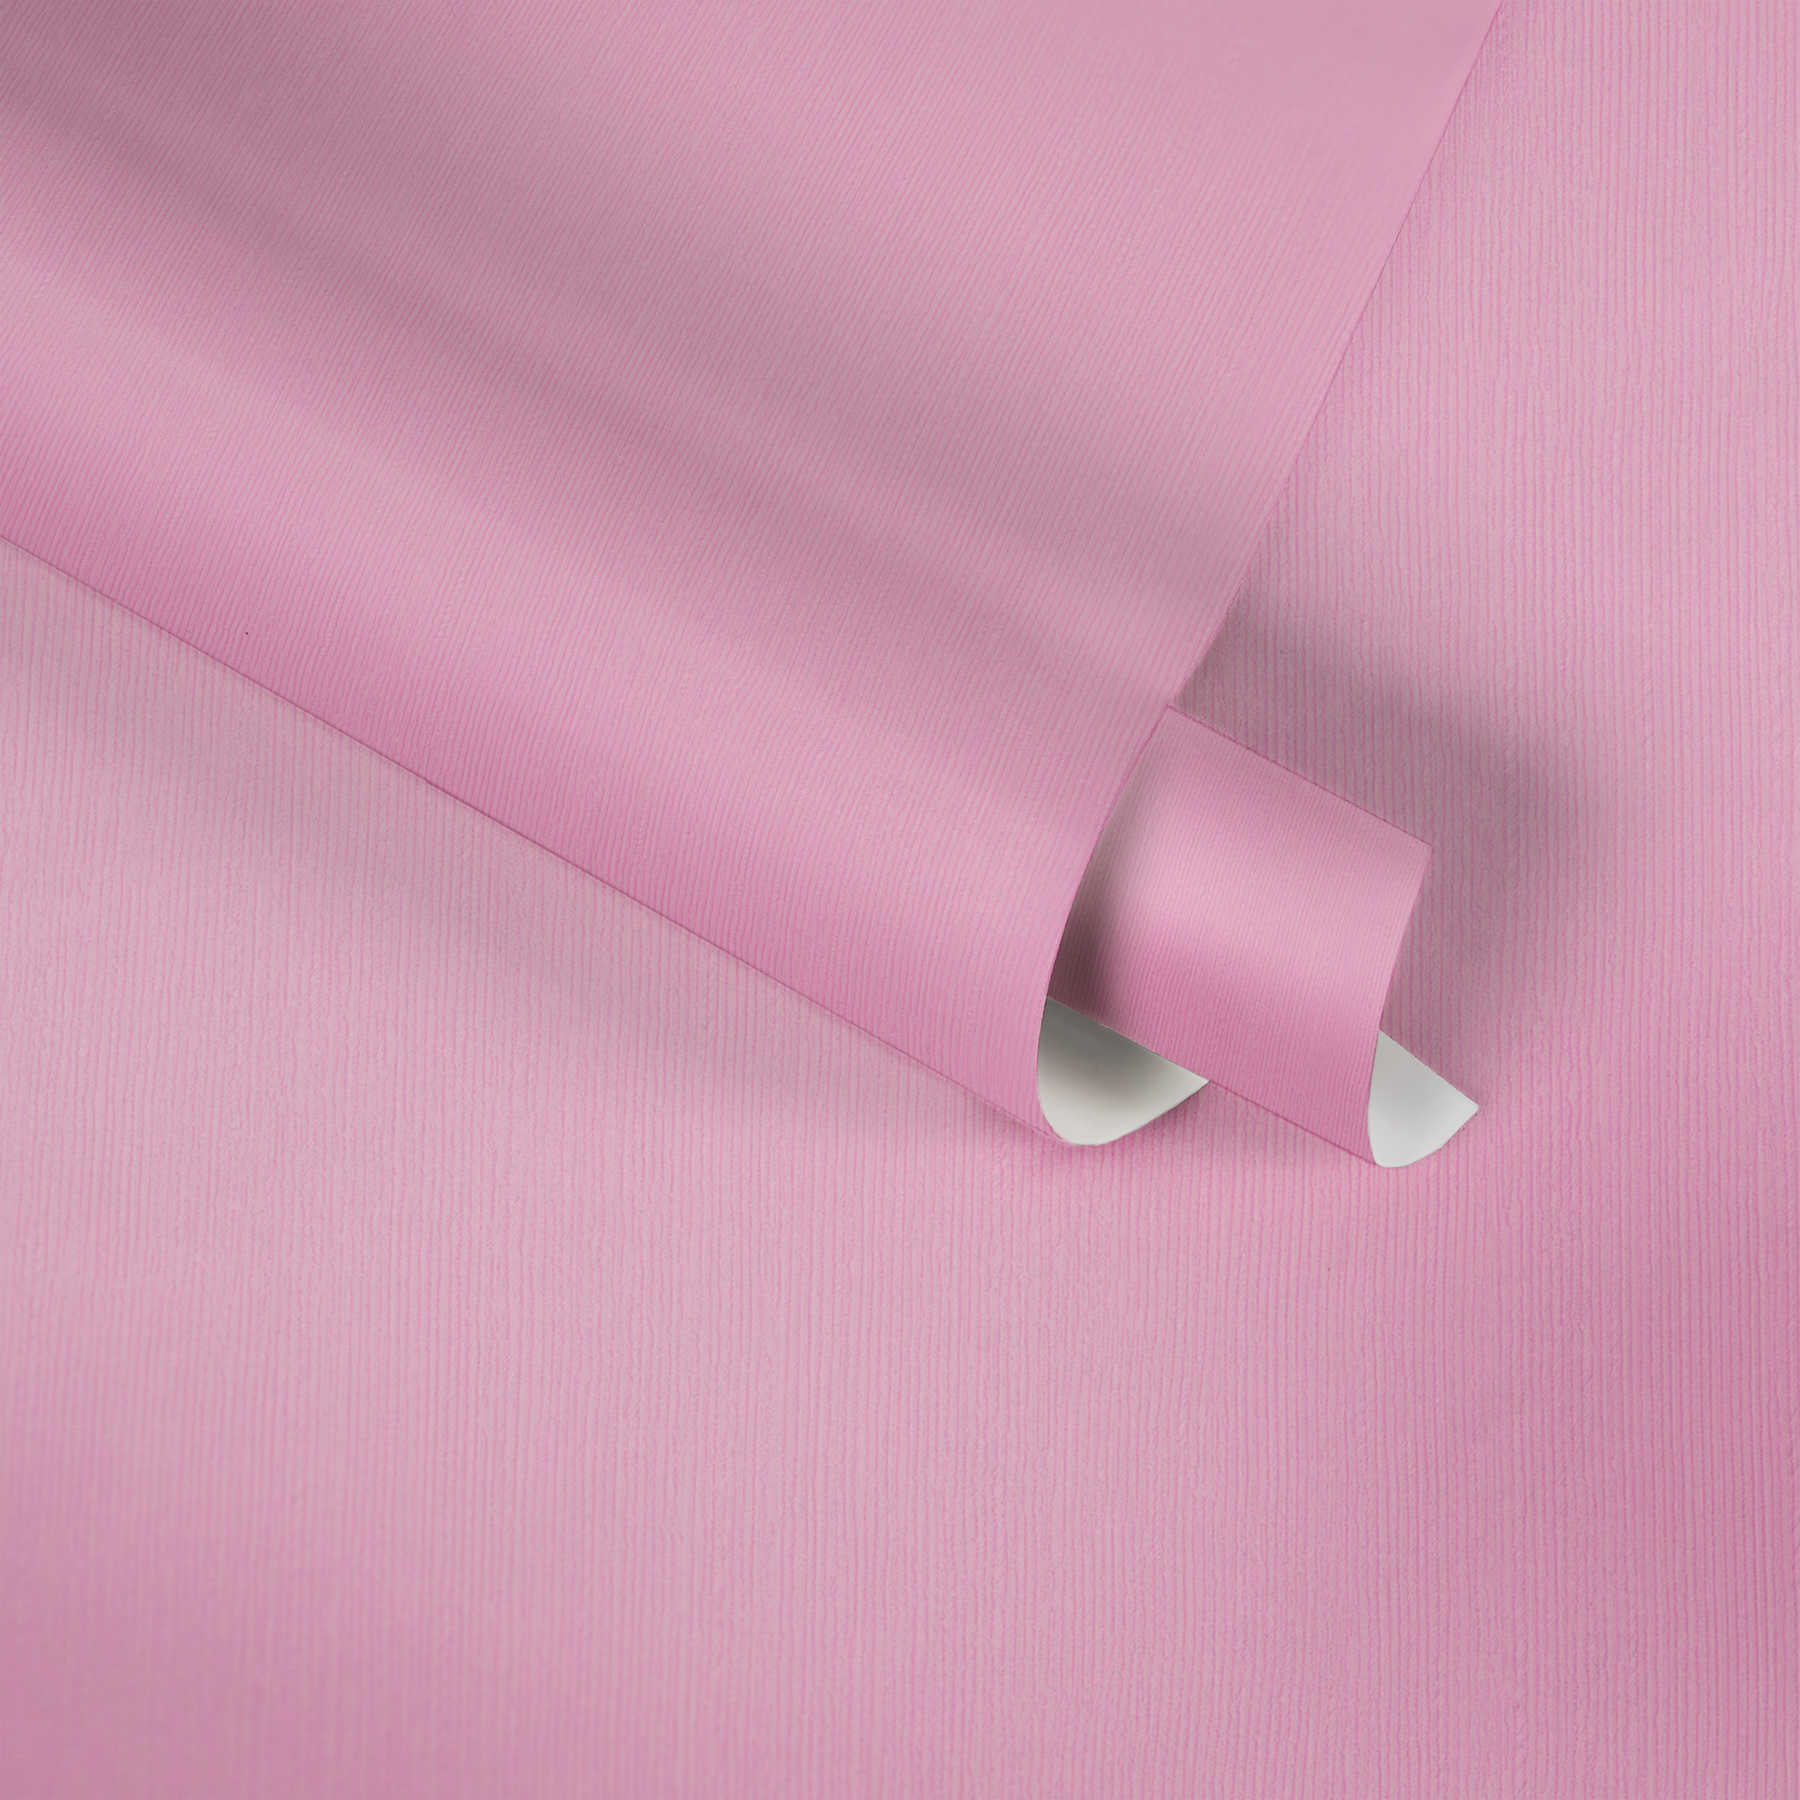             Pink paper wallpaper plain with embossed texture - pink
        